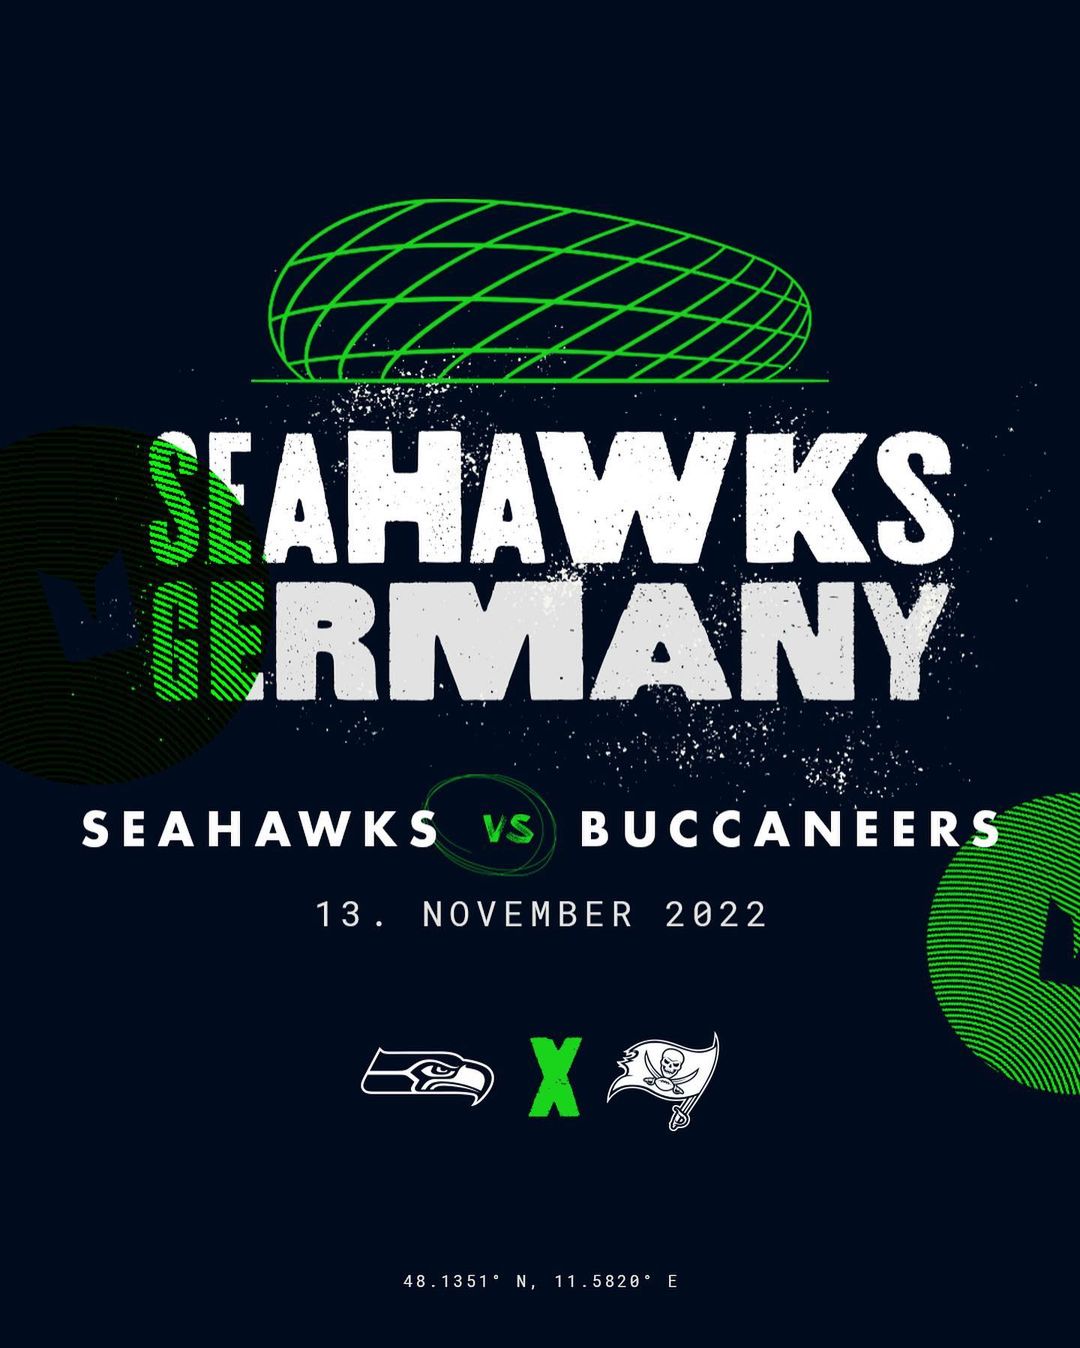 Grab your passports, @12s! #12sEverywhere  Learn more at Seahawks.com/12sEveryw...